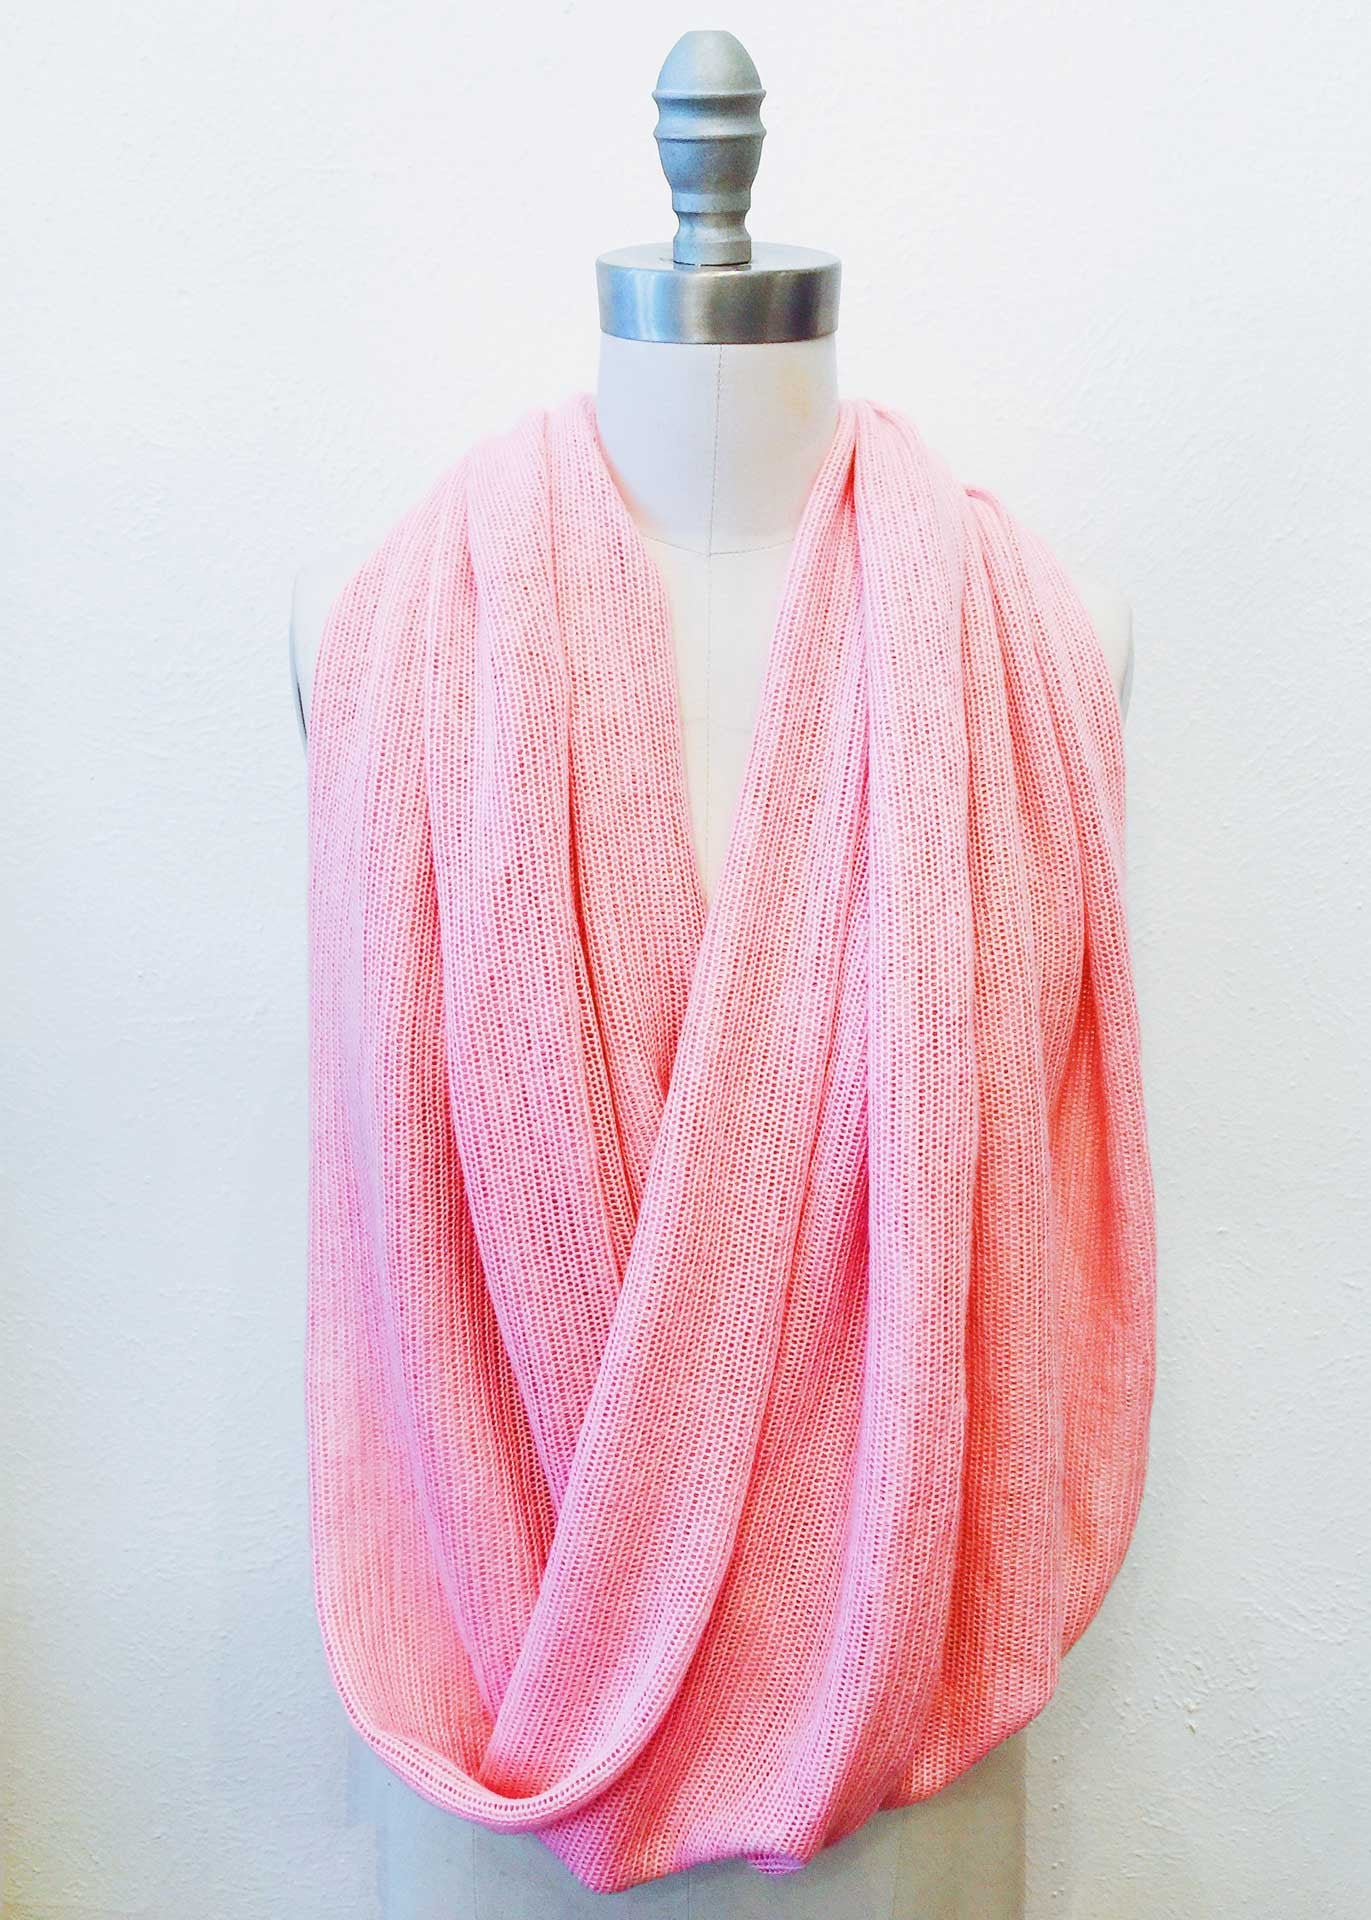 Pink Sweater Knit Infinity Scarf